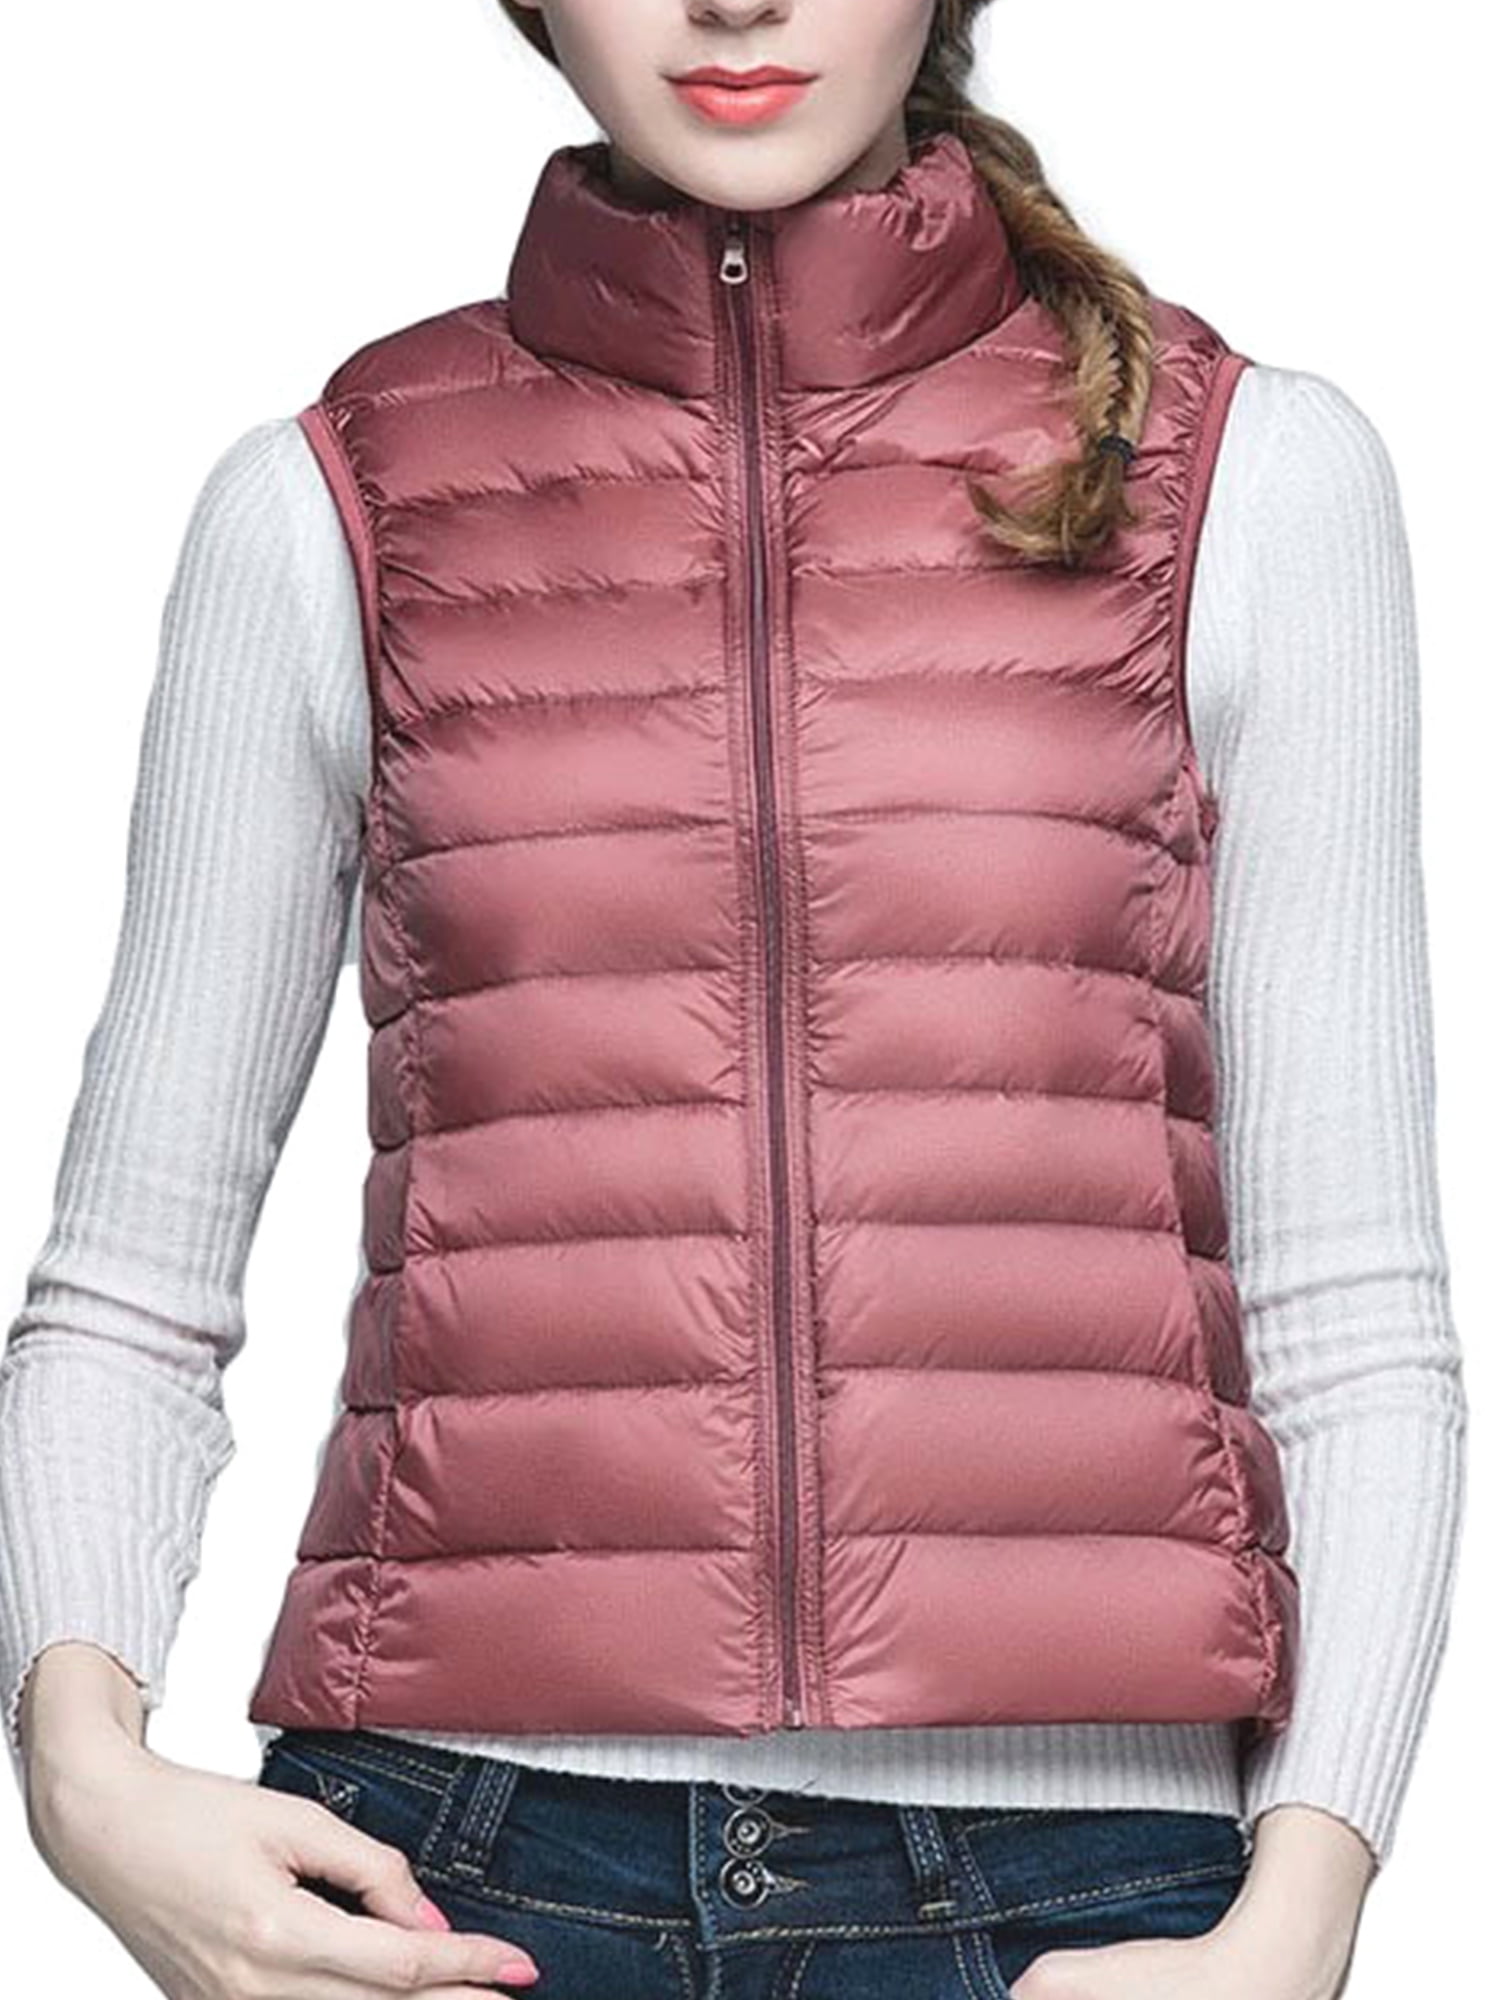 New Ladies Quilted Body Warmer Gilet Women/'s Jacket Plus Size